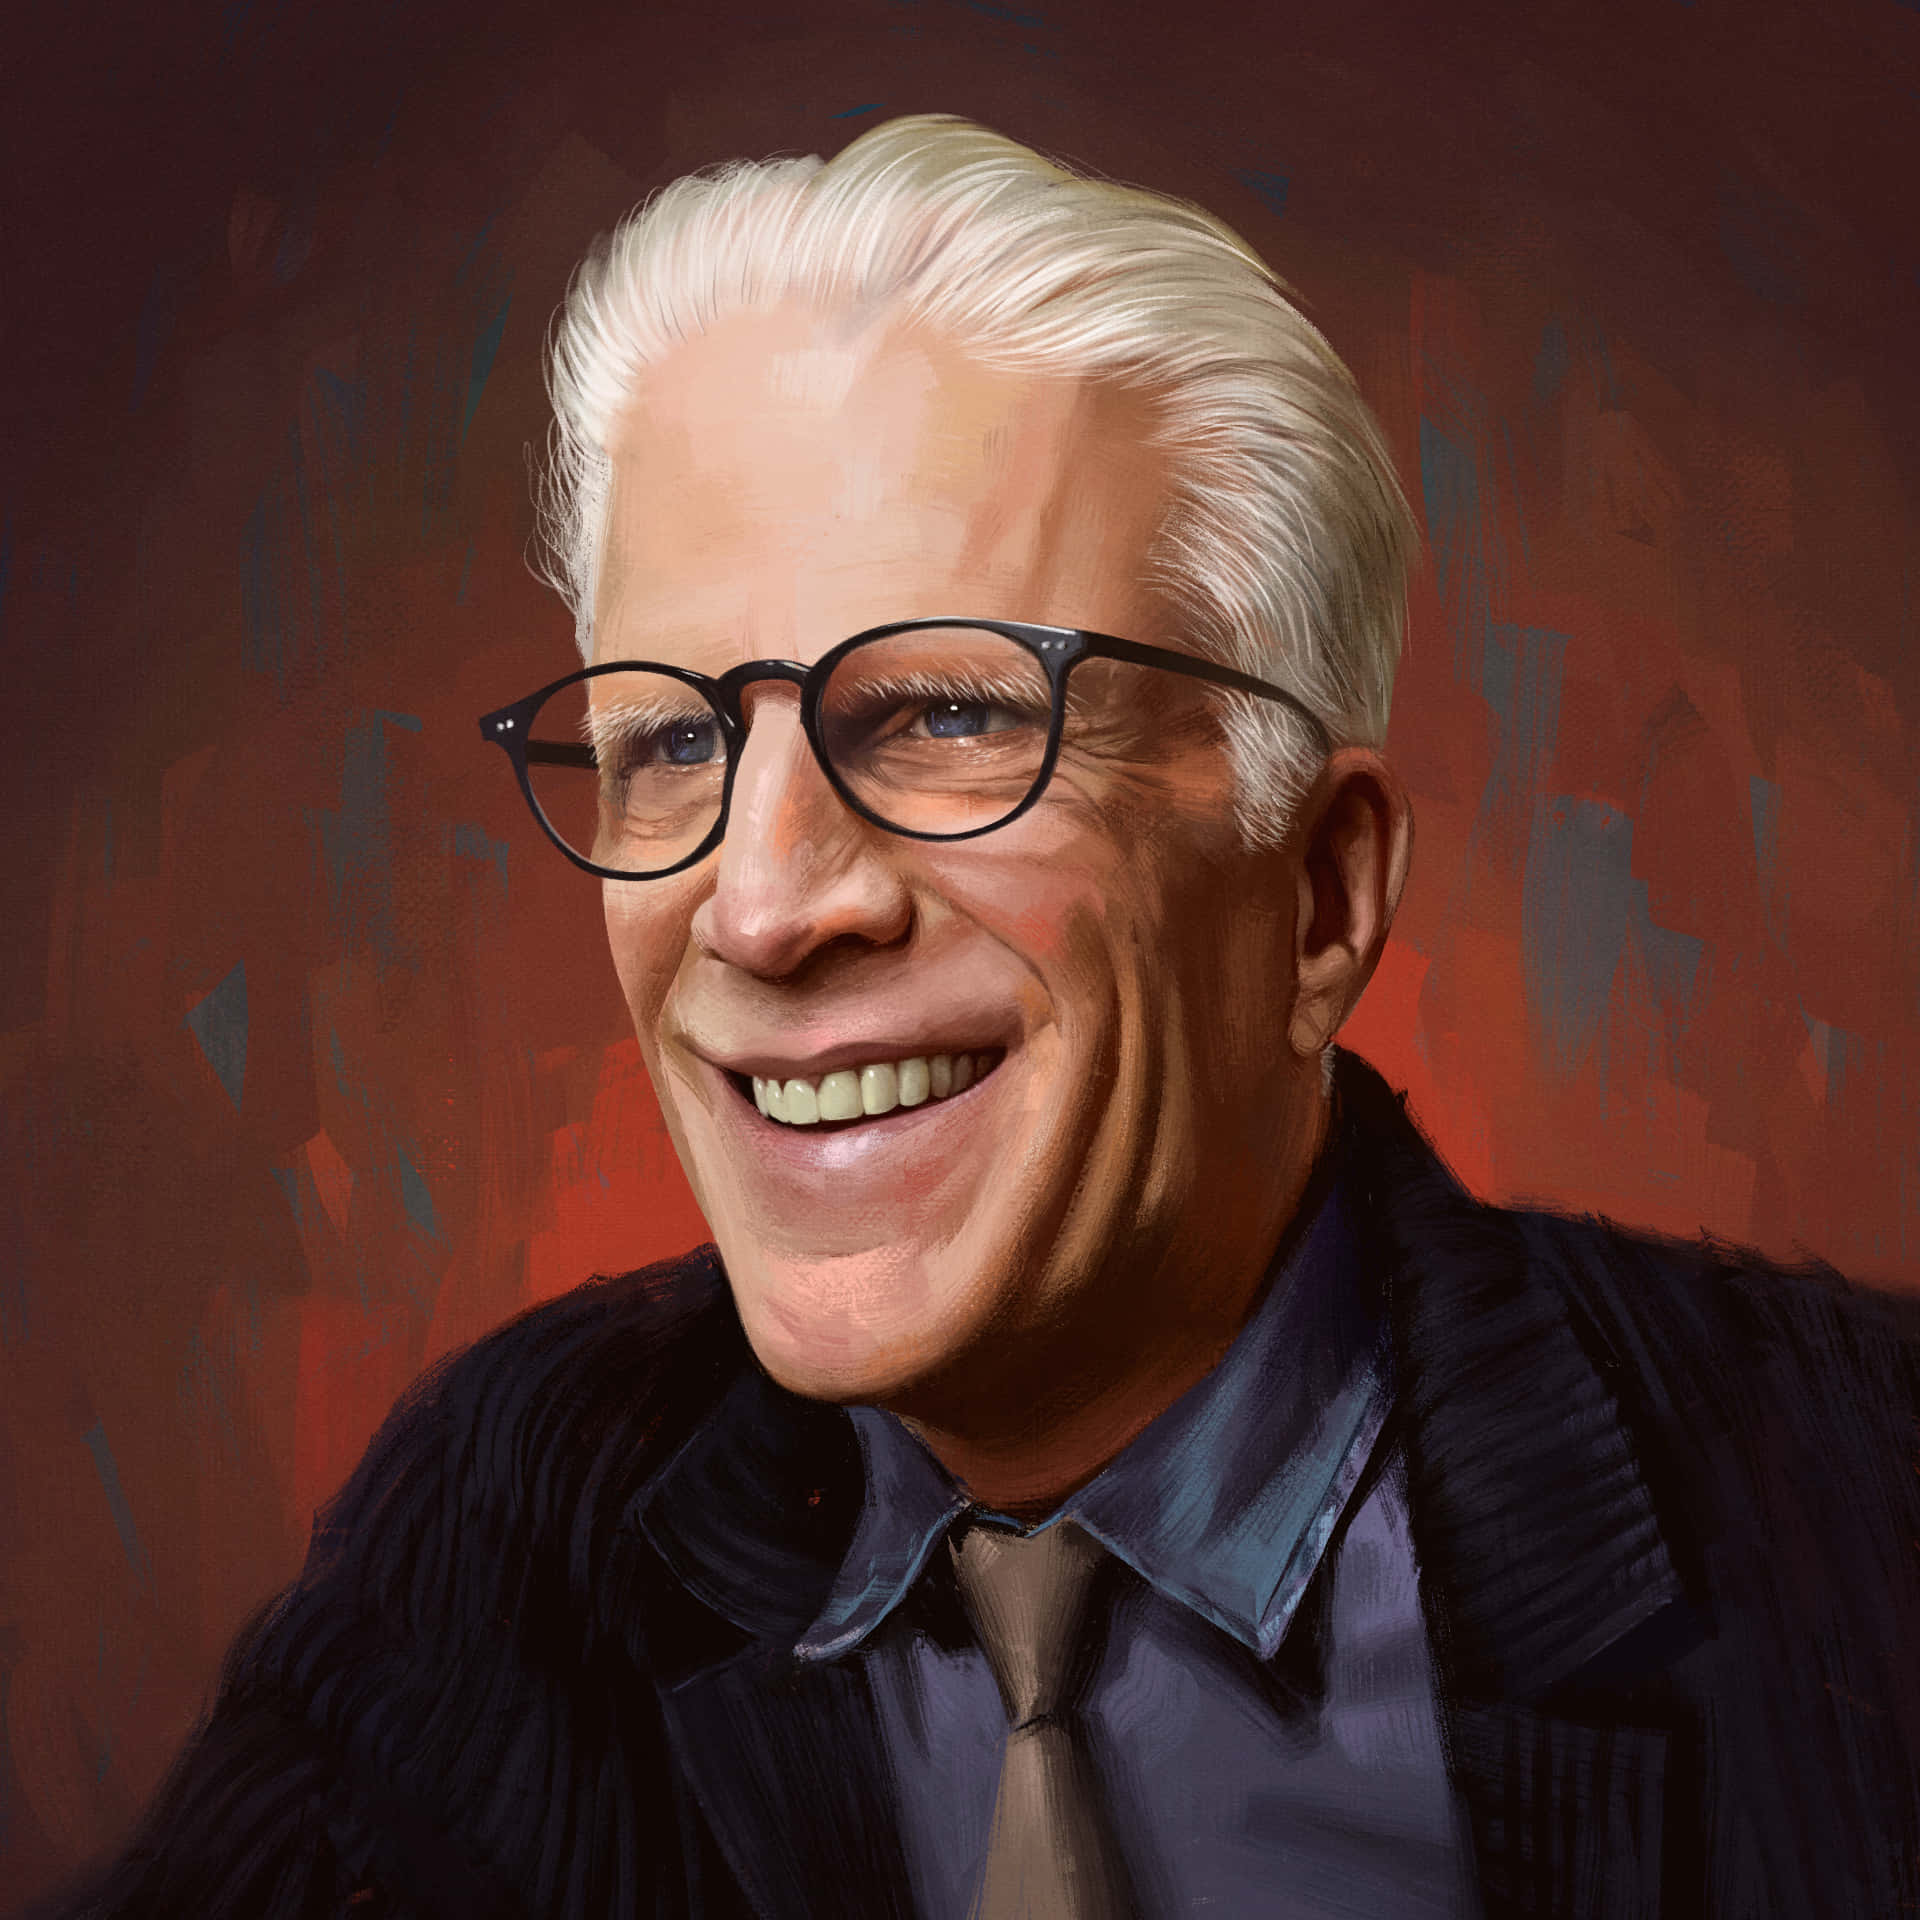 Ted Danson kicks off a successful career as an actor Wallpaper